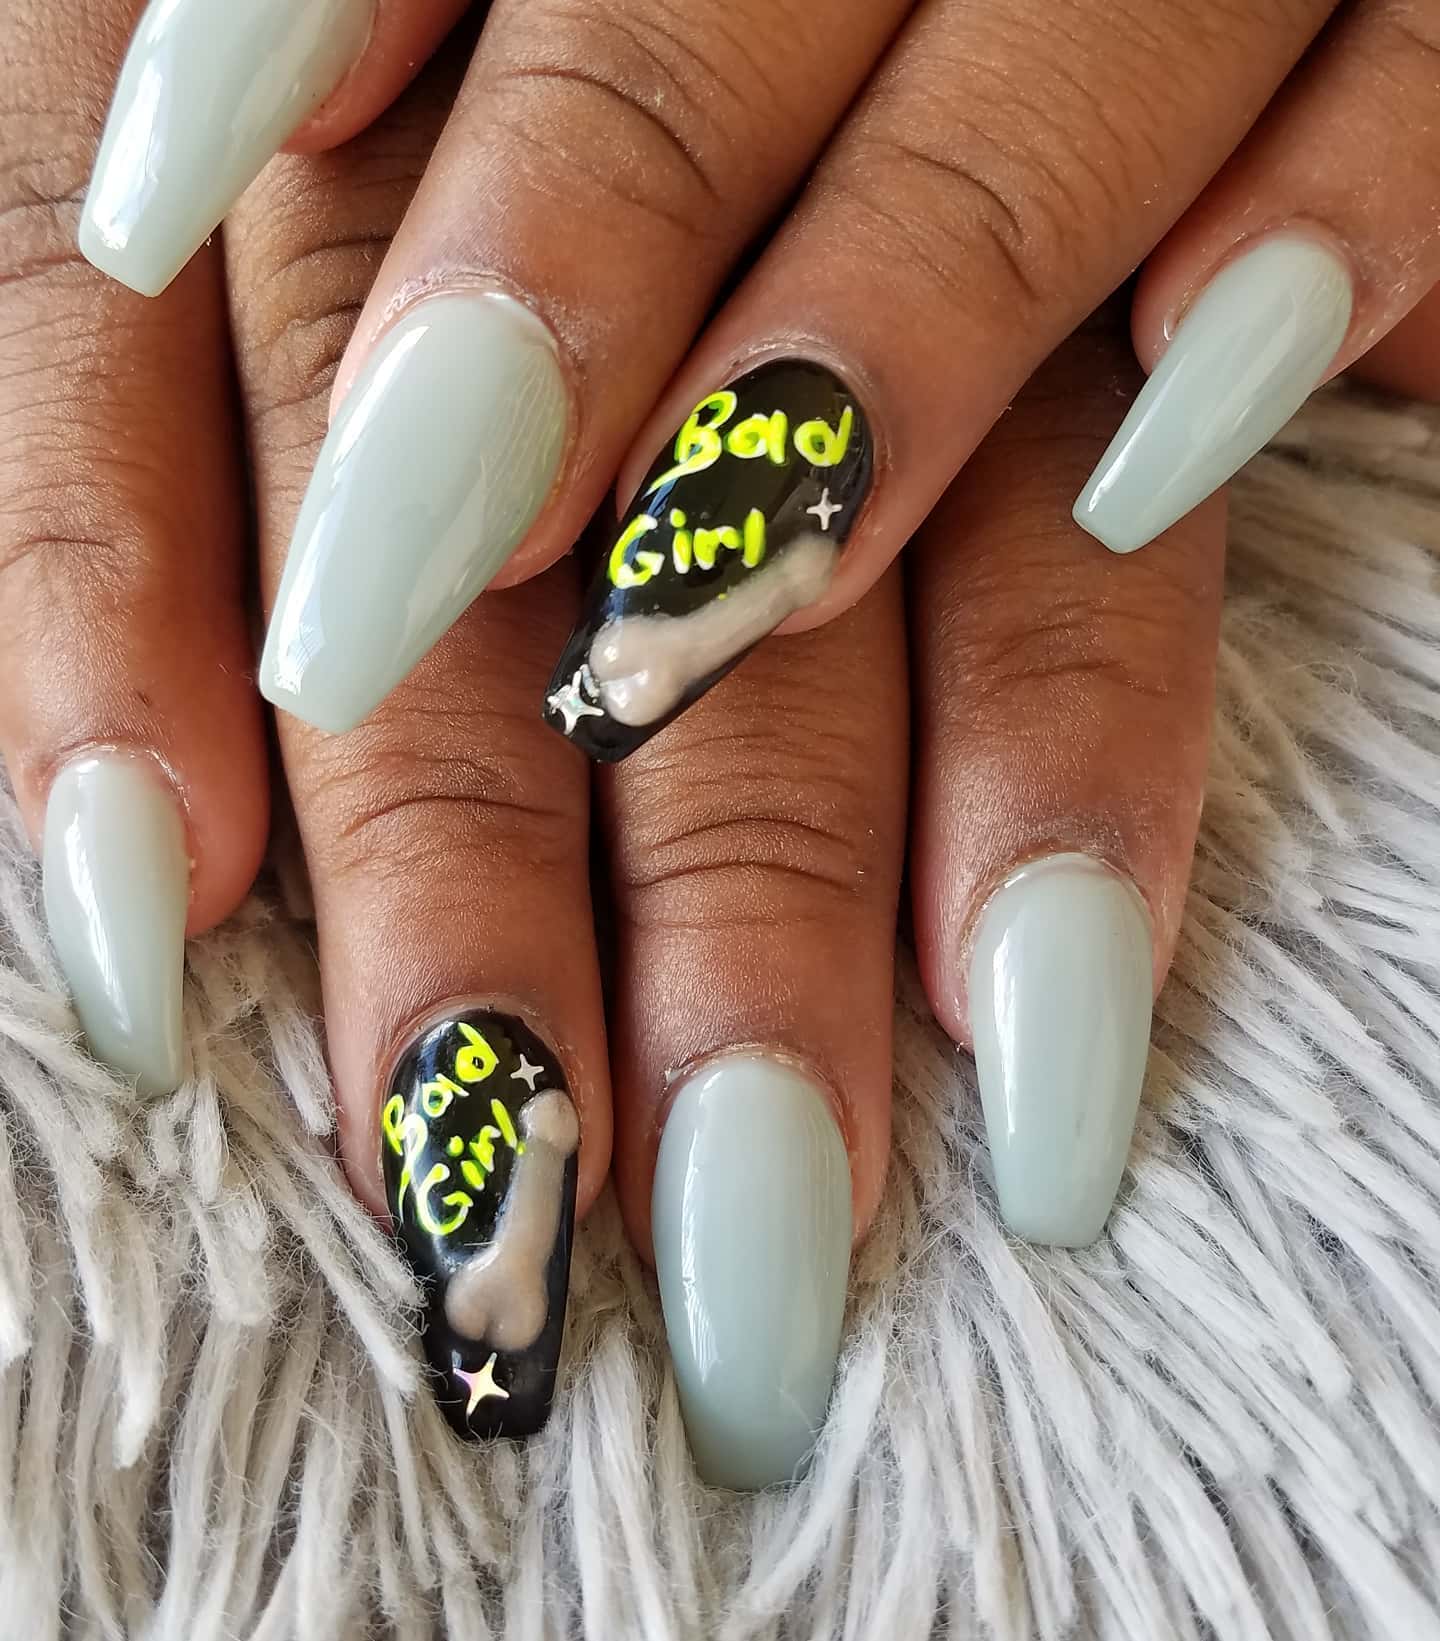 To stand out from the crowd and show that you are that bad girl, go for this nail design and have a penis nail art for your accent nail.